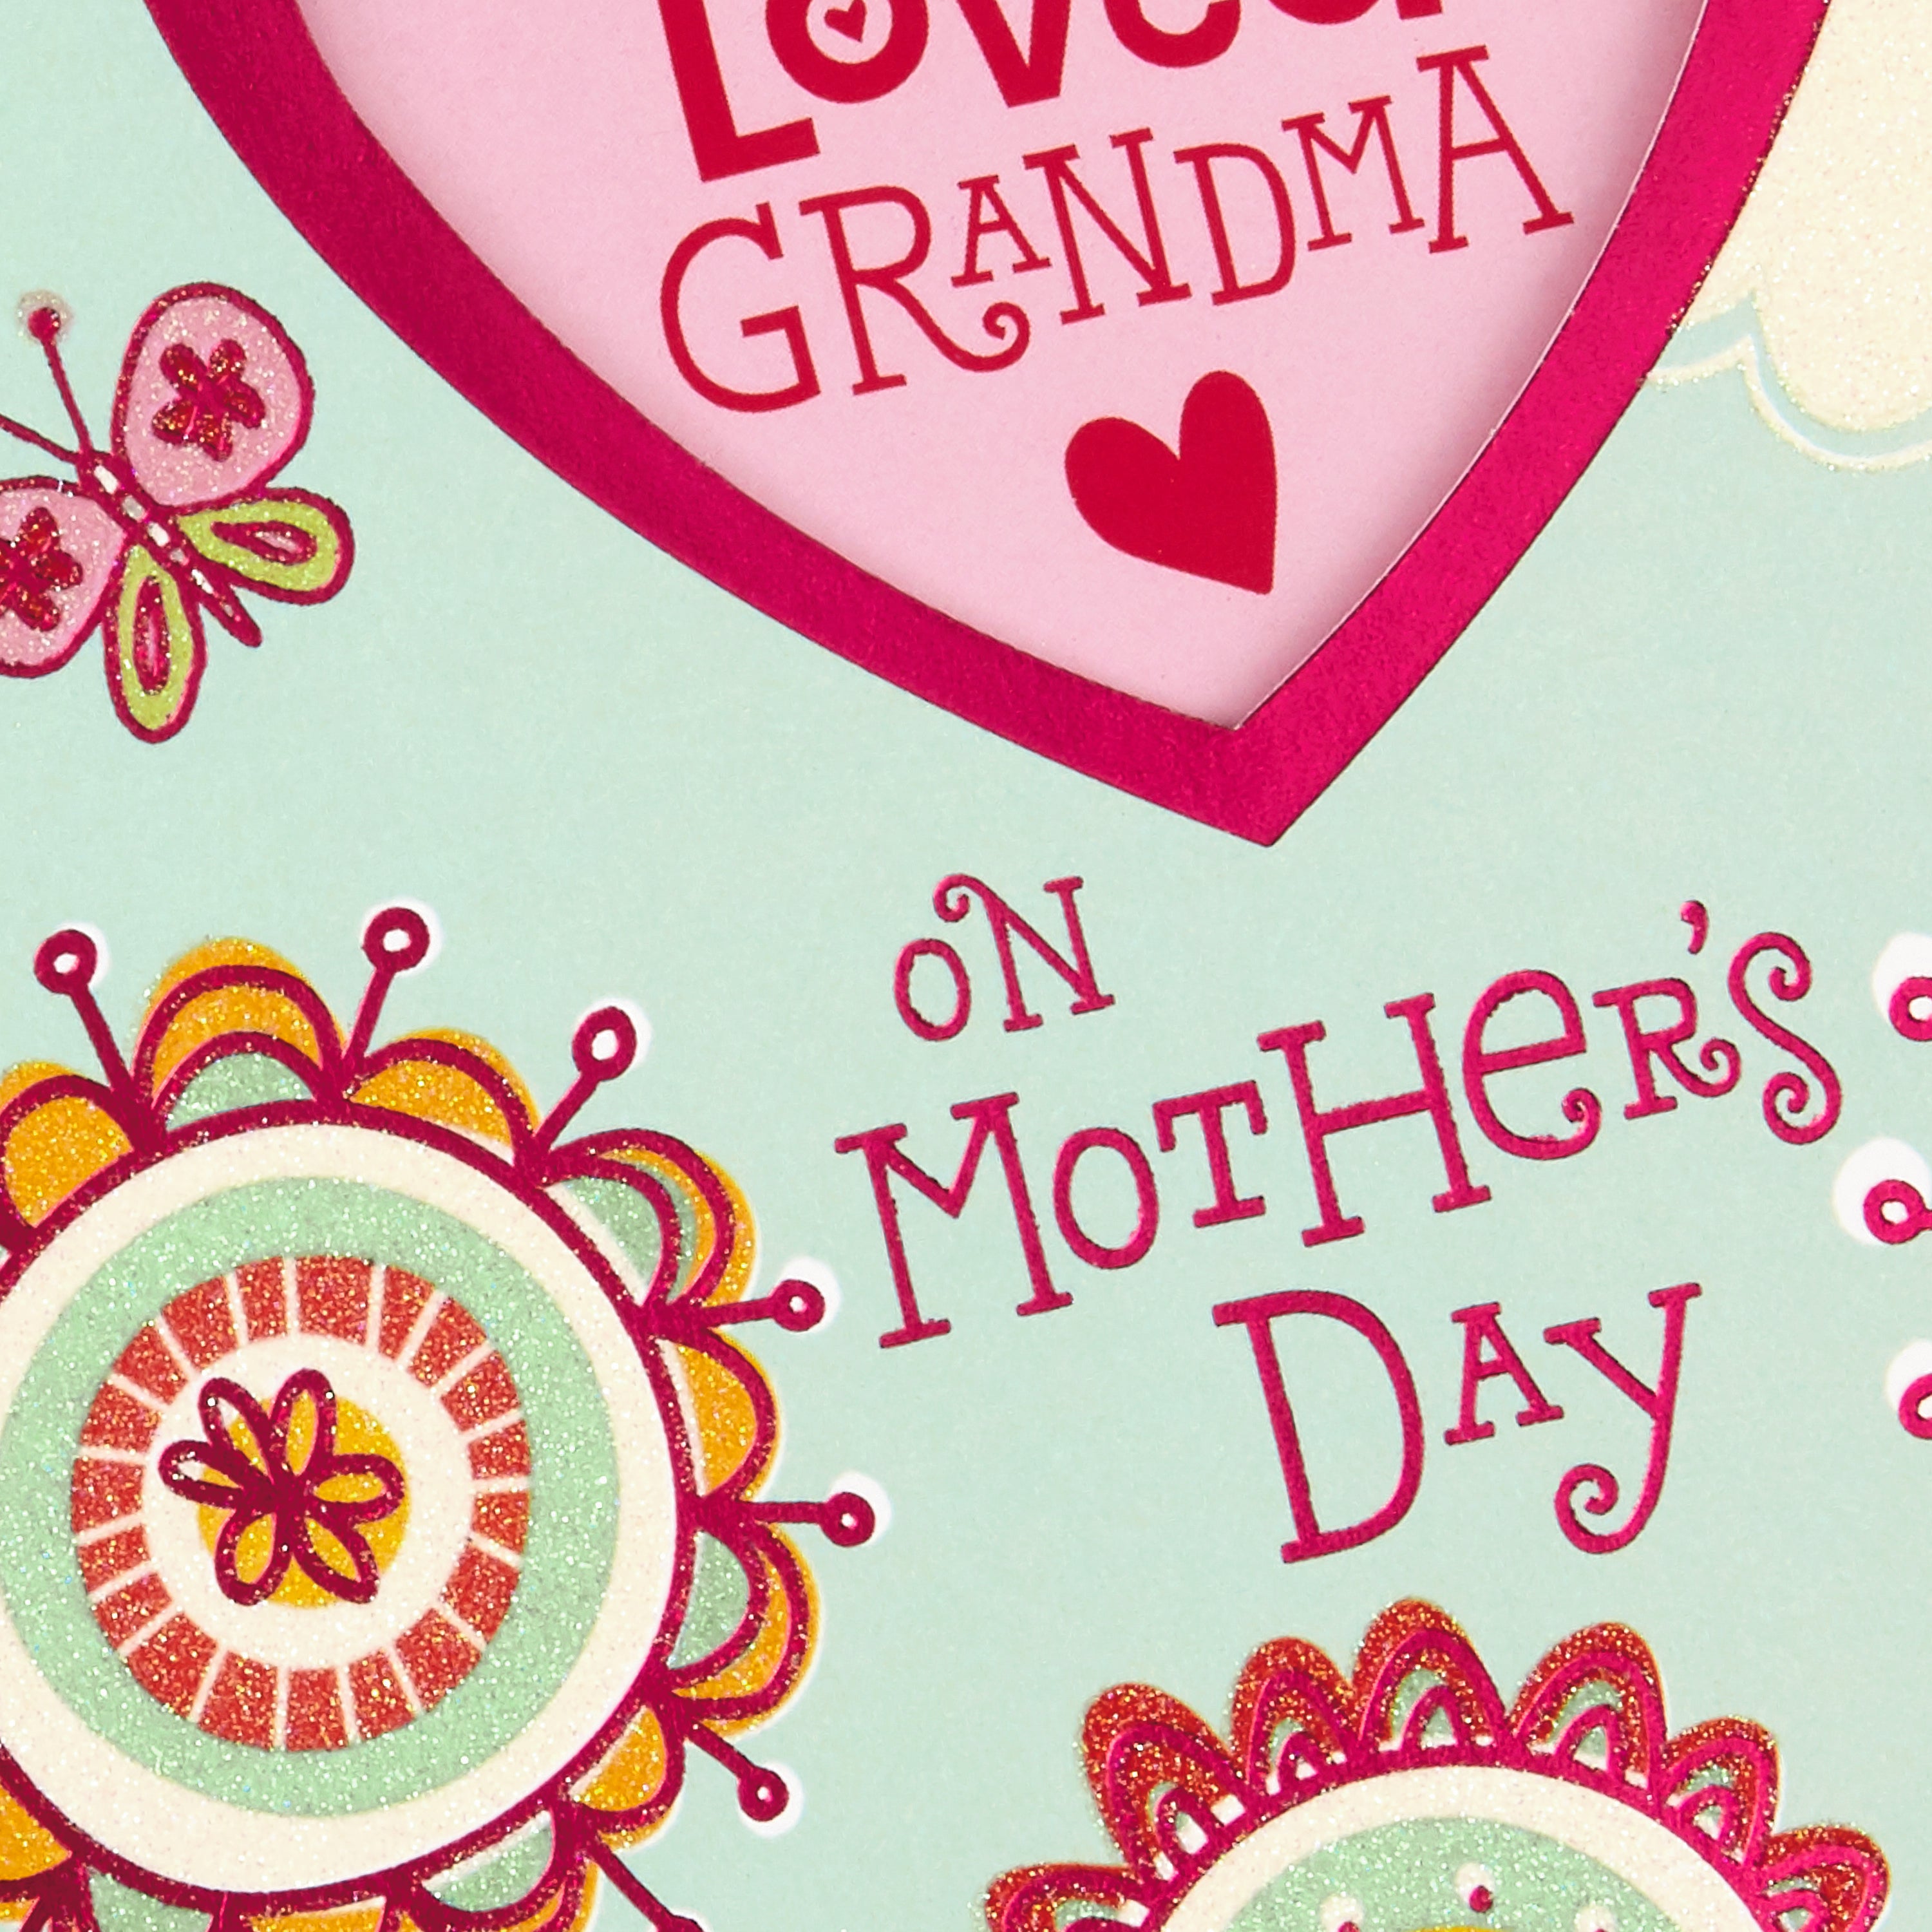 Mother's Day Card for Grandmother from Kids (Very Loved Grandma Sticker)